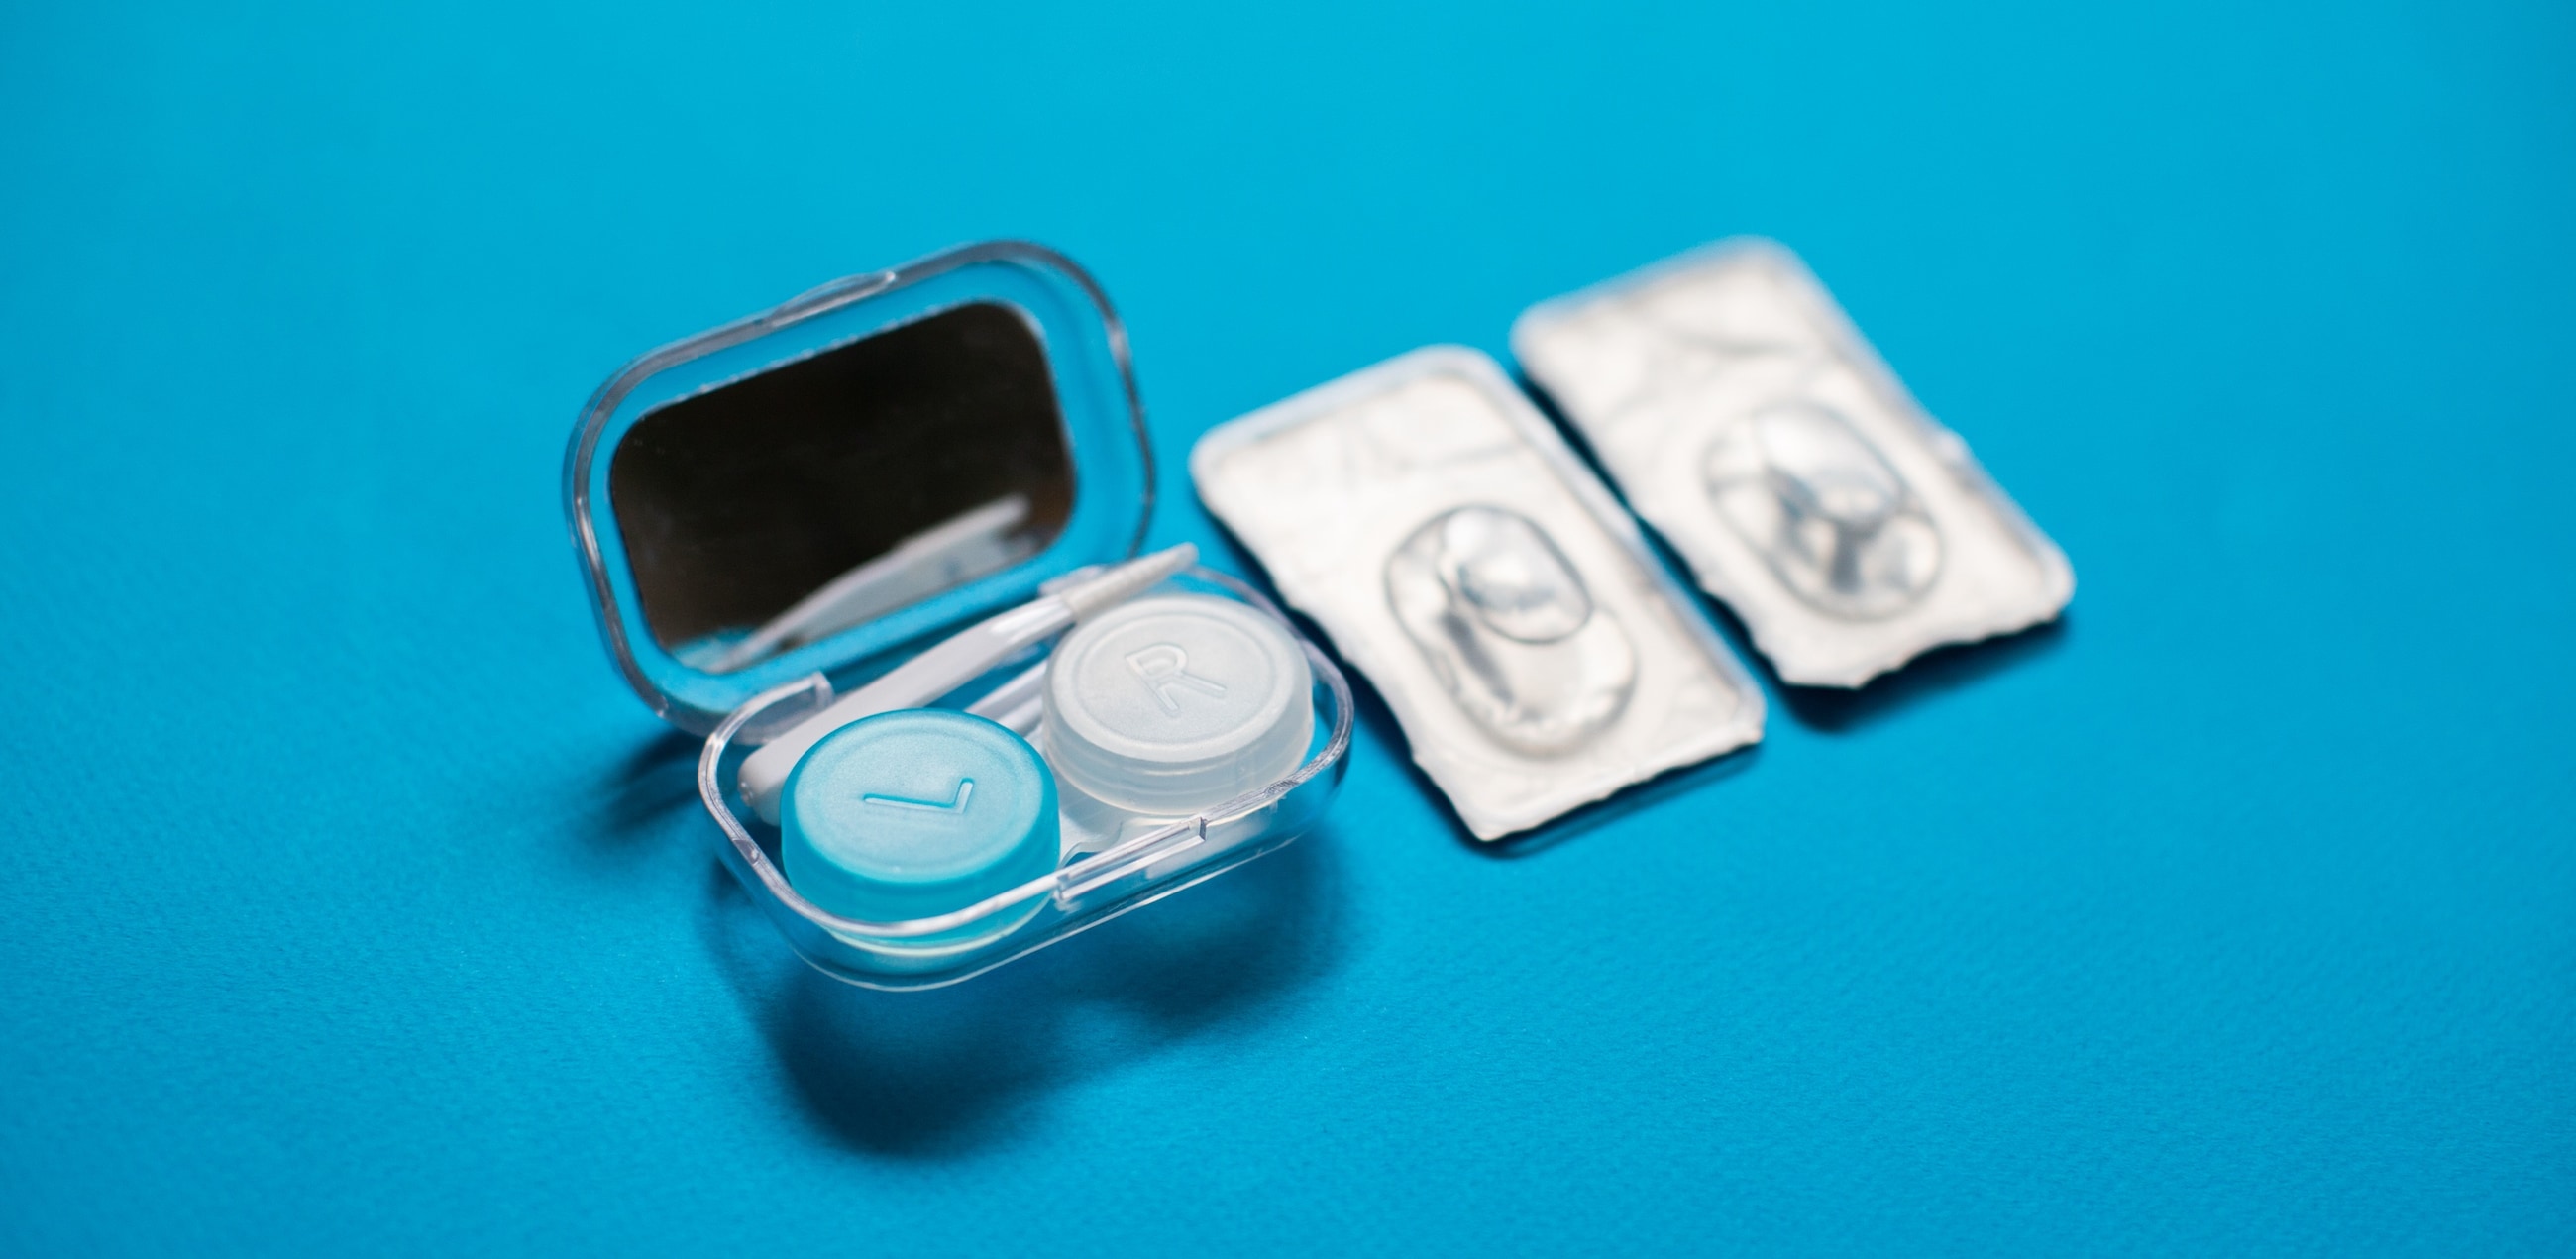 Contact lenses types: everything you need to know